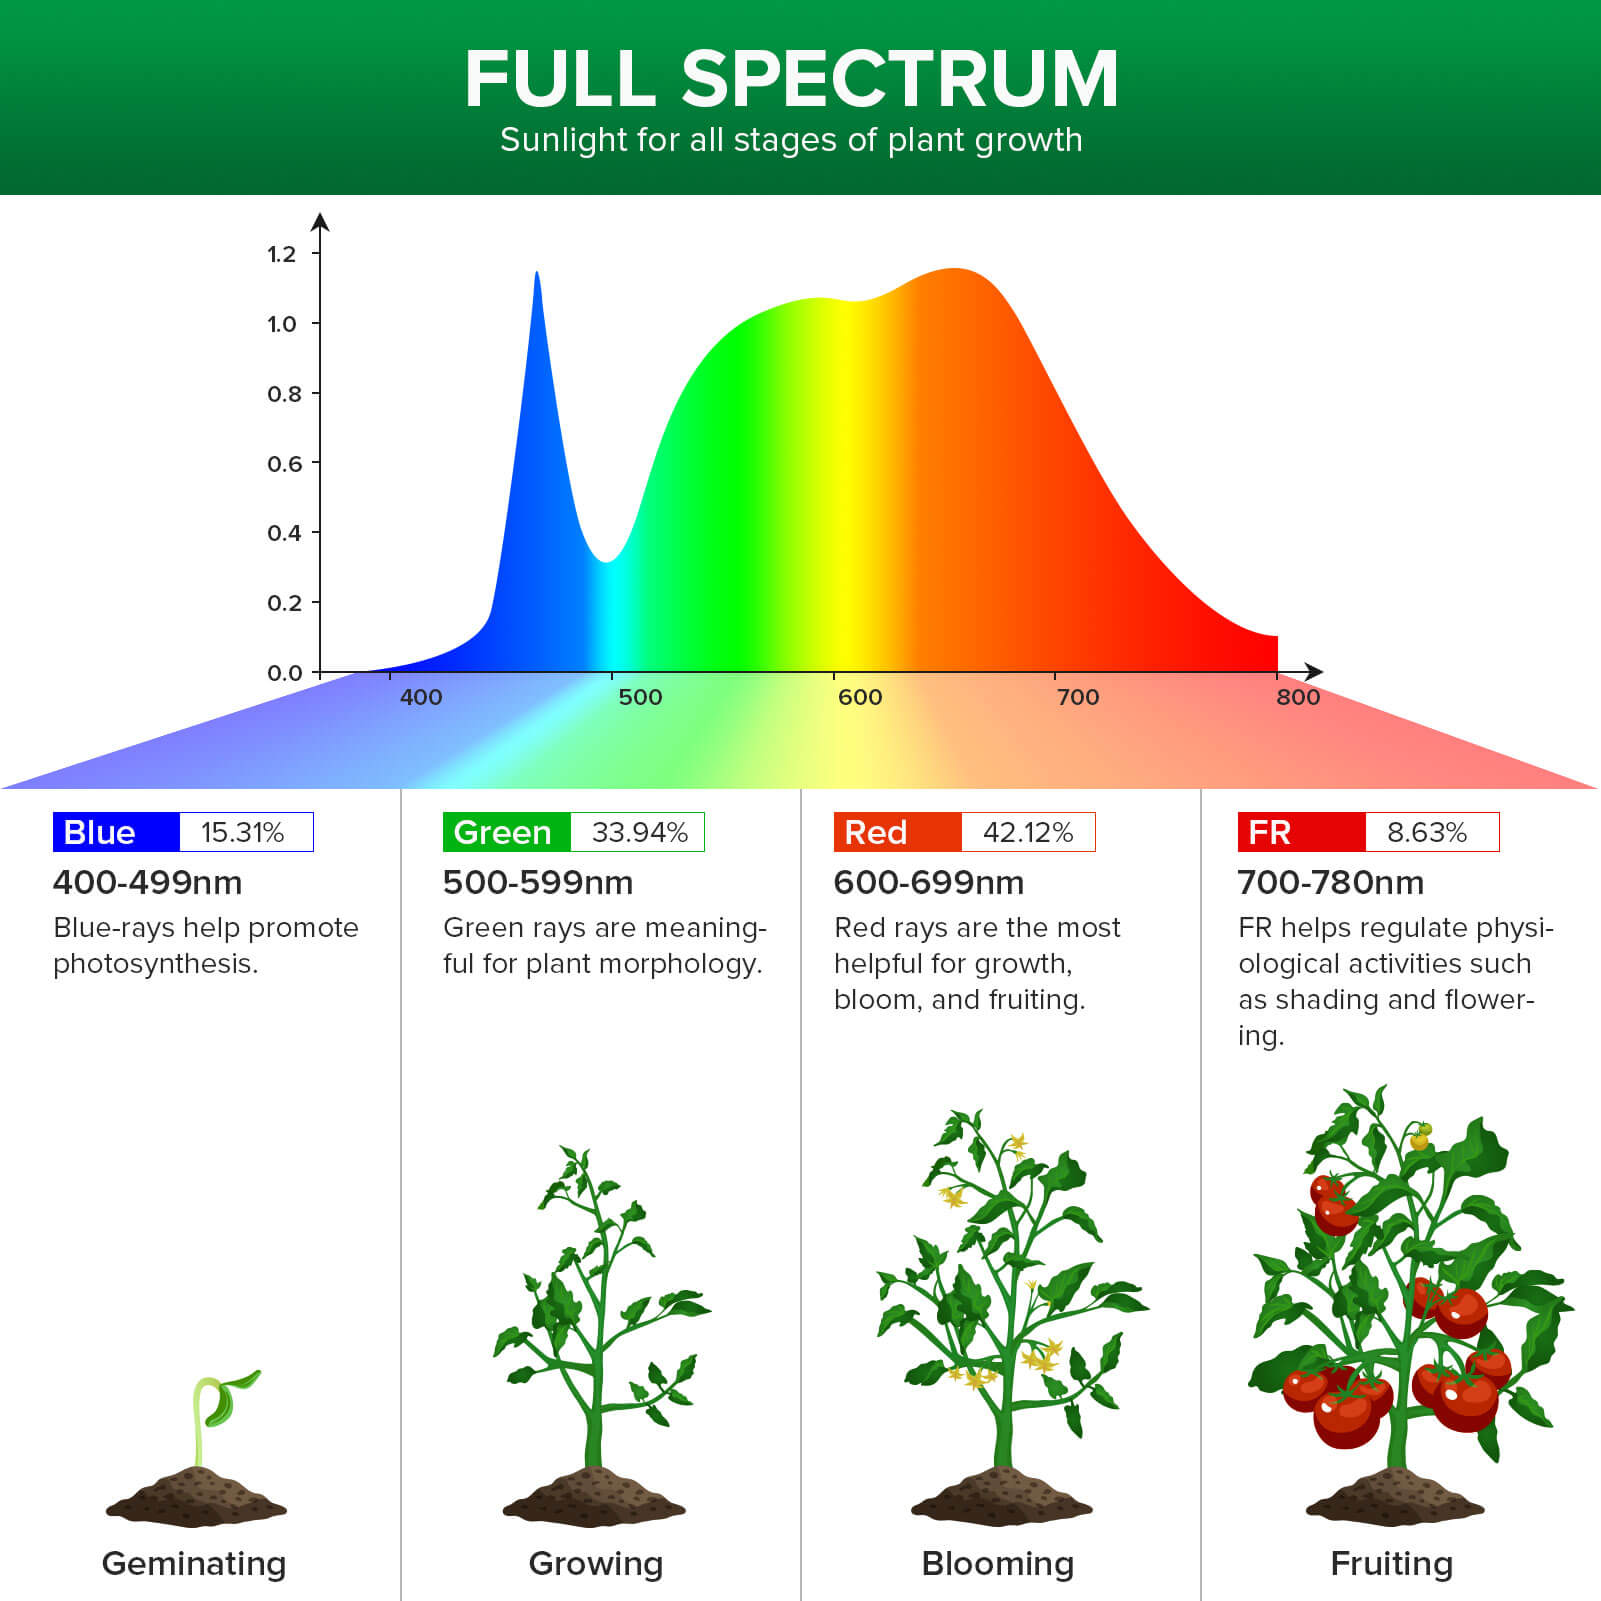 120W/220W Led Grow Light (Folding Wings) is full spectrum, sunlight for all stages of plant growth